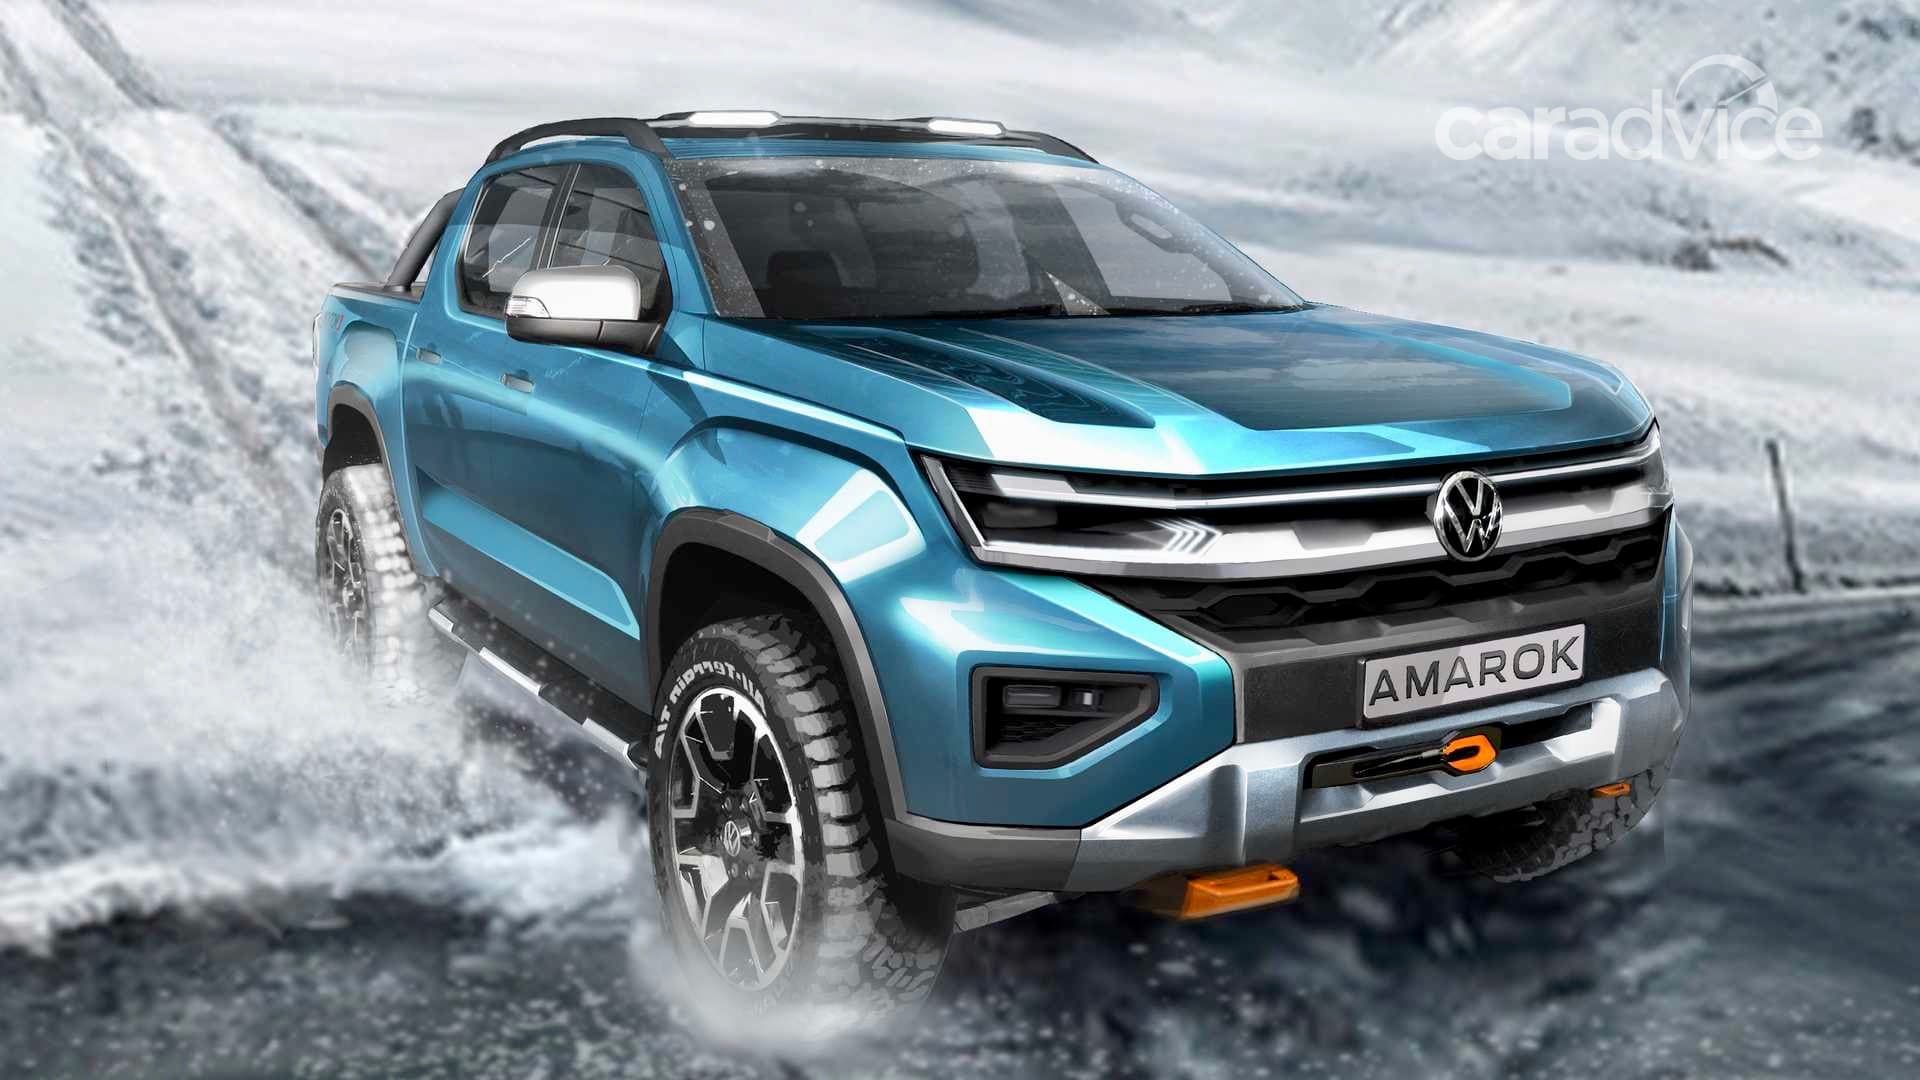 2023 Volkswagen Amarok imagined with offroad accessories CarAdvice